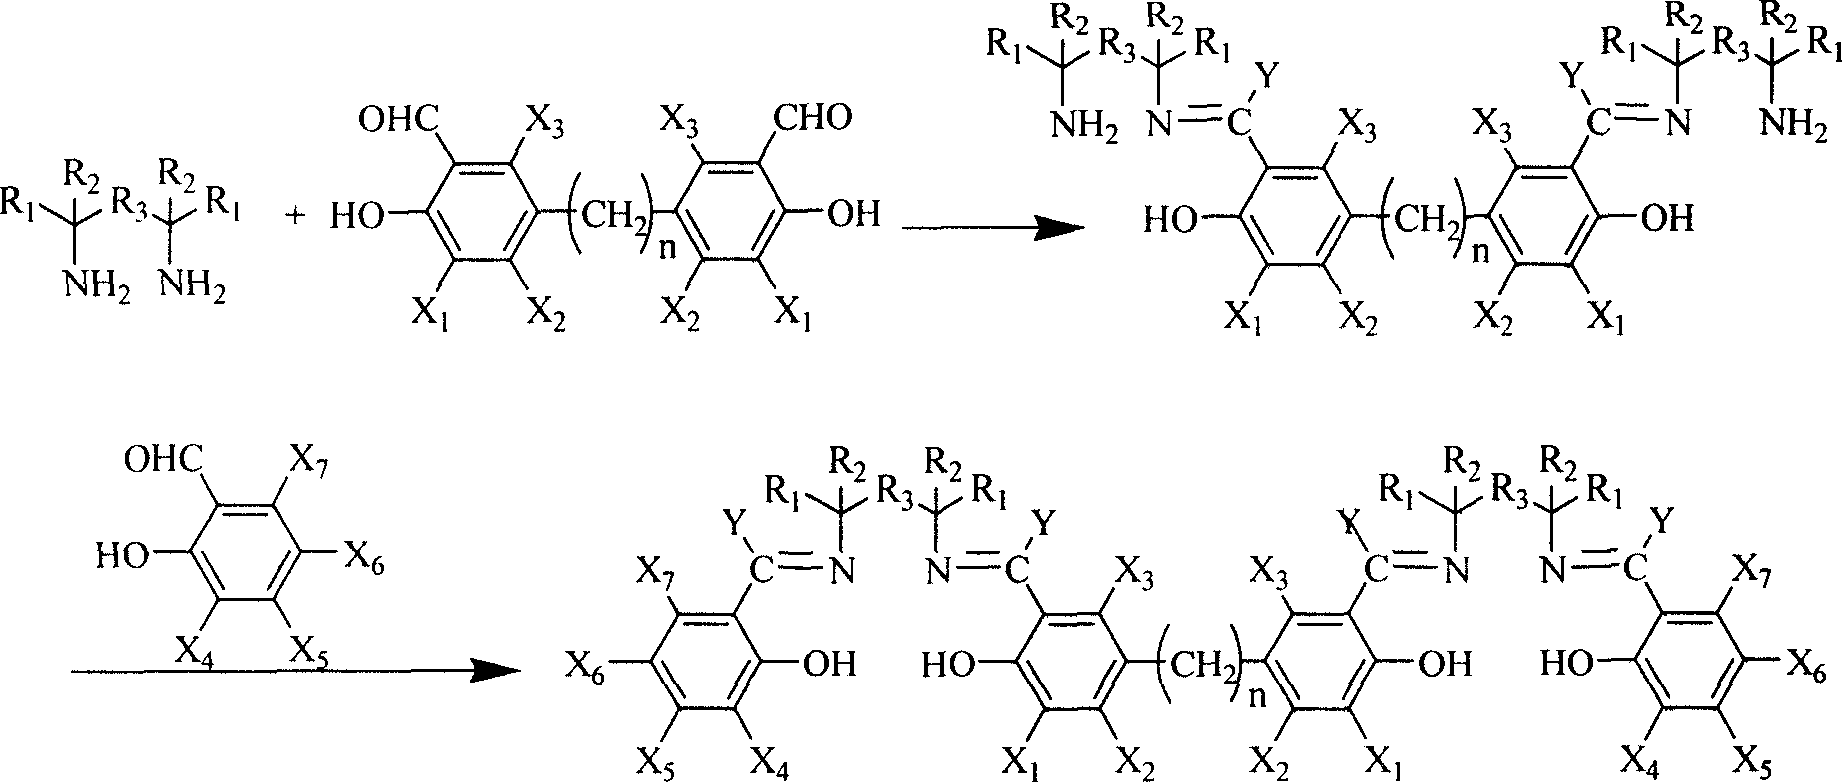 Synthesis method for preparing Salen ligand in chiral or not chiral binuclear